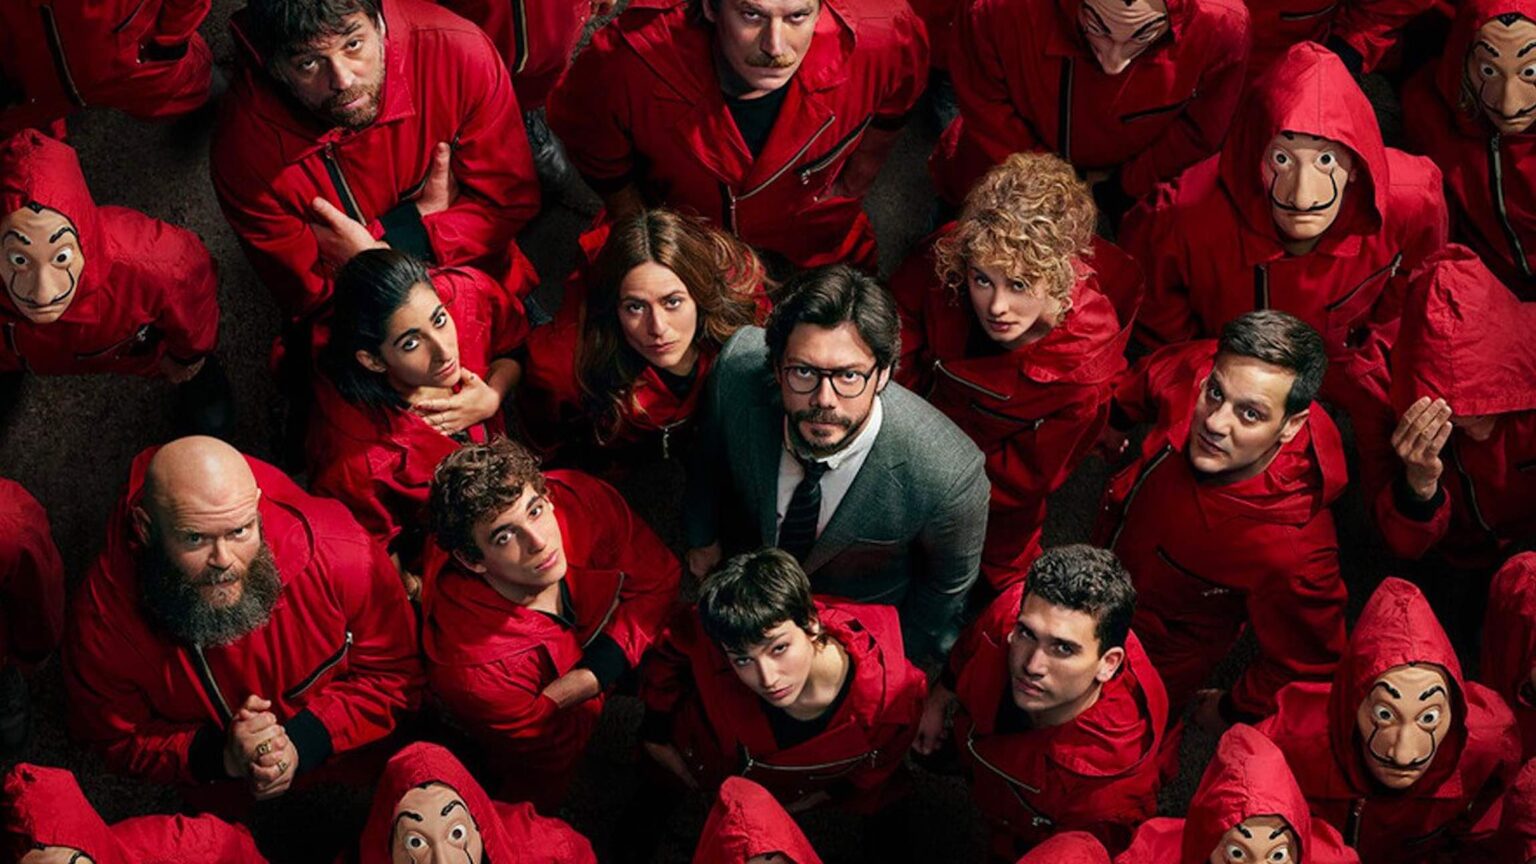 'Money Heist' season 3 was one of the best chapters of the show’s story. Here are the best quotes from season 3.